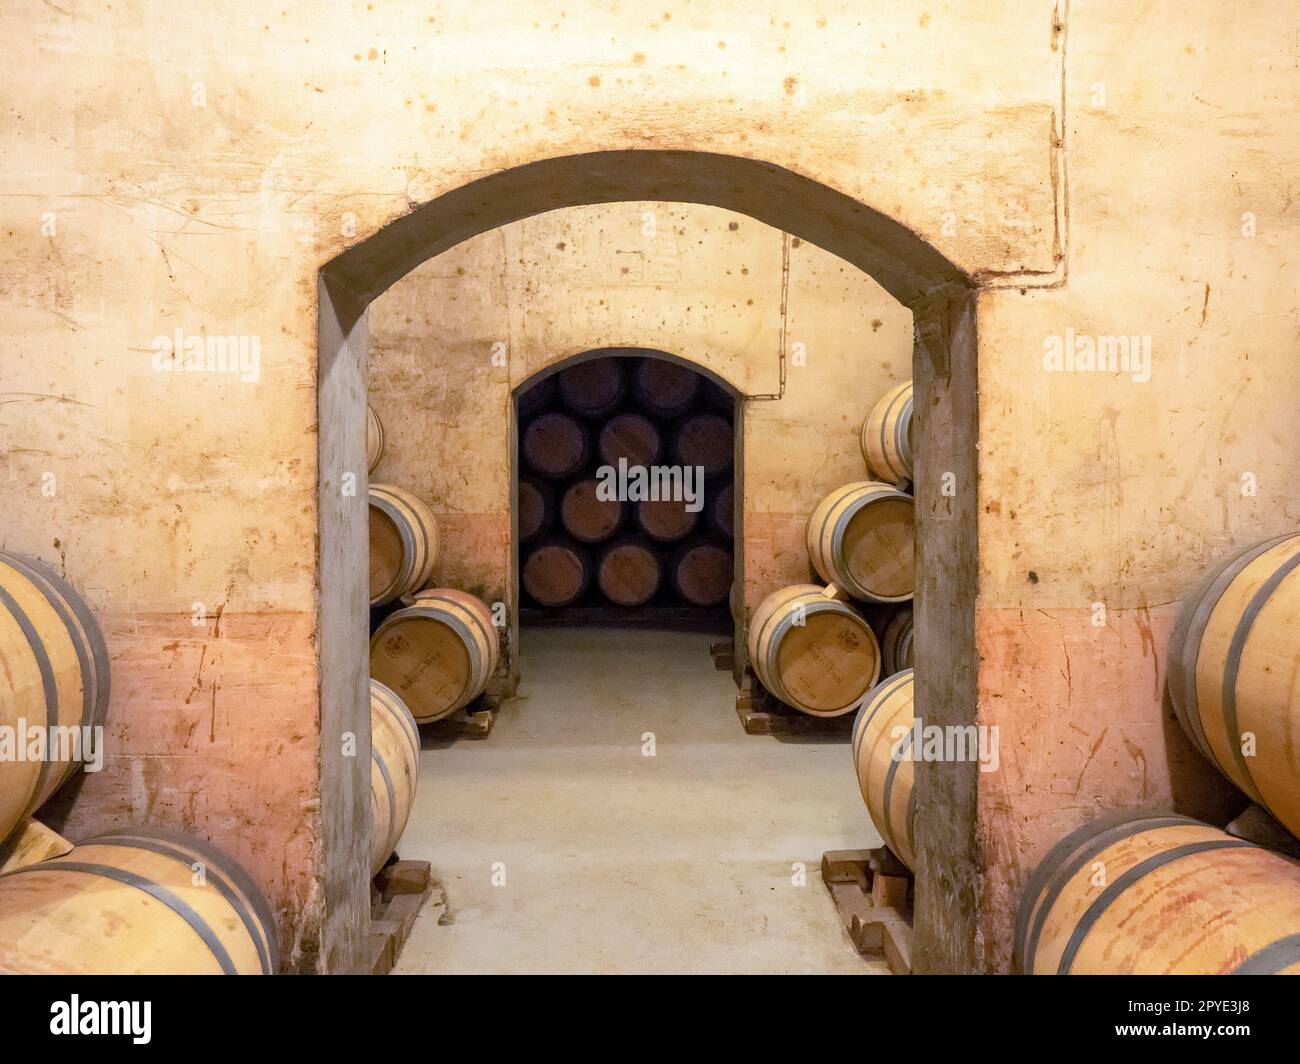 Old wooden barrels for preserving wine, inside the Marques de Riscal winery in the Rioja Alavesa. Stock Photo